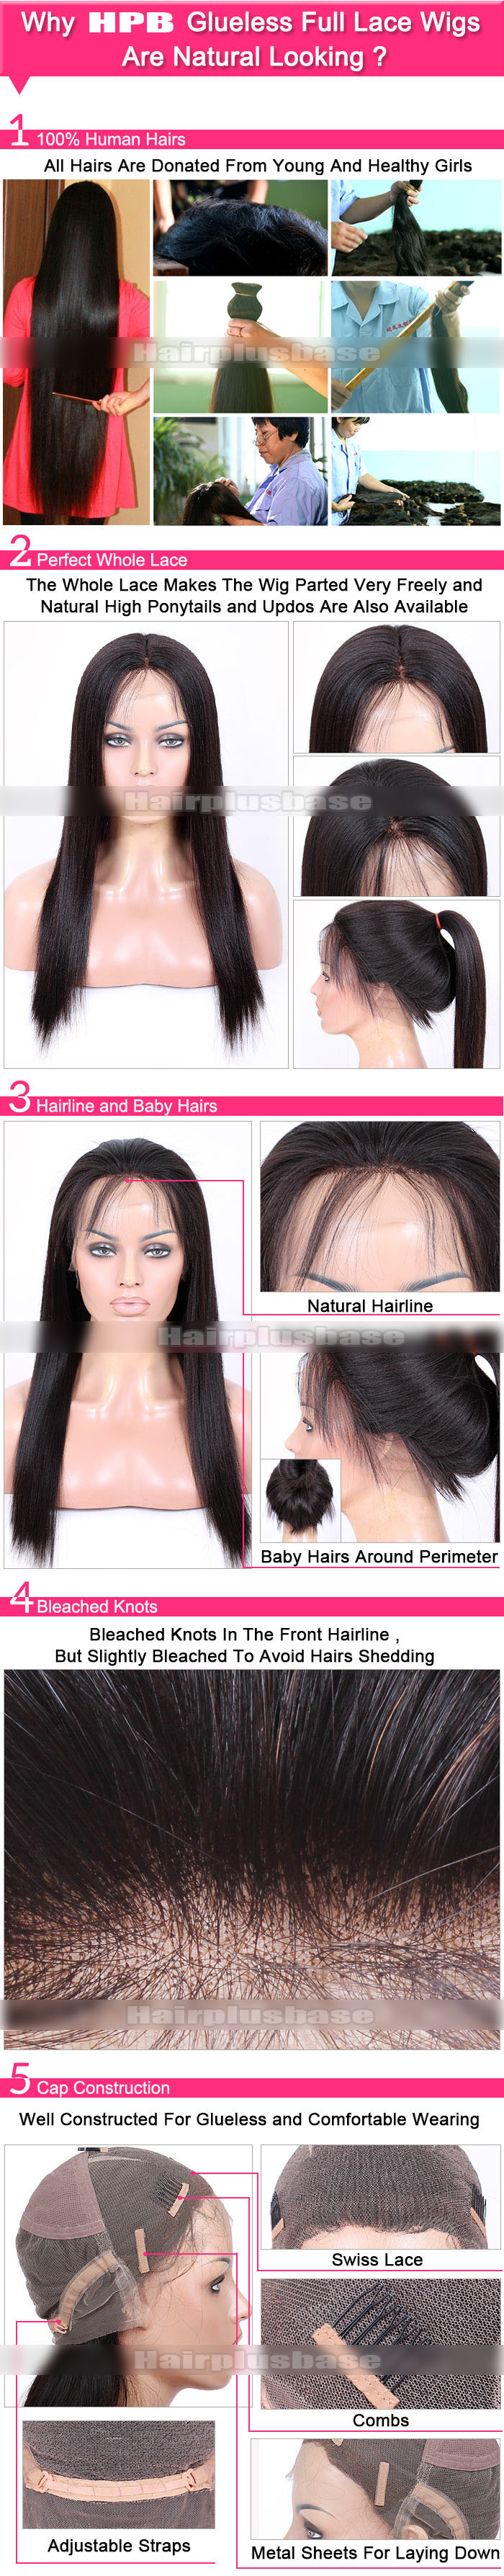 Glueless Full Lace Wig Natural looking 